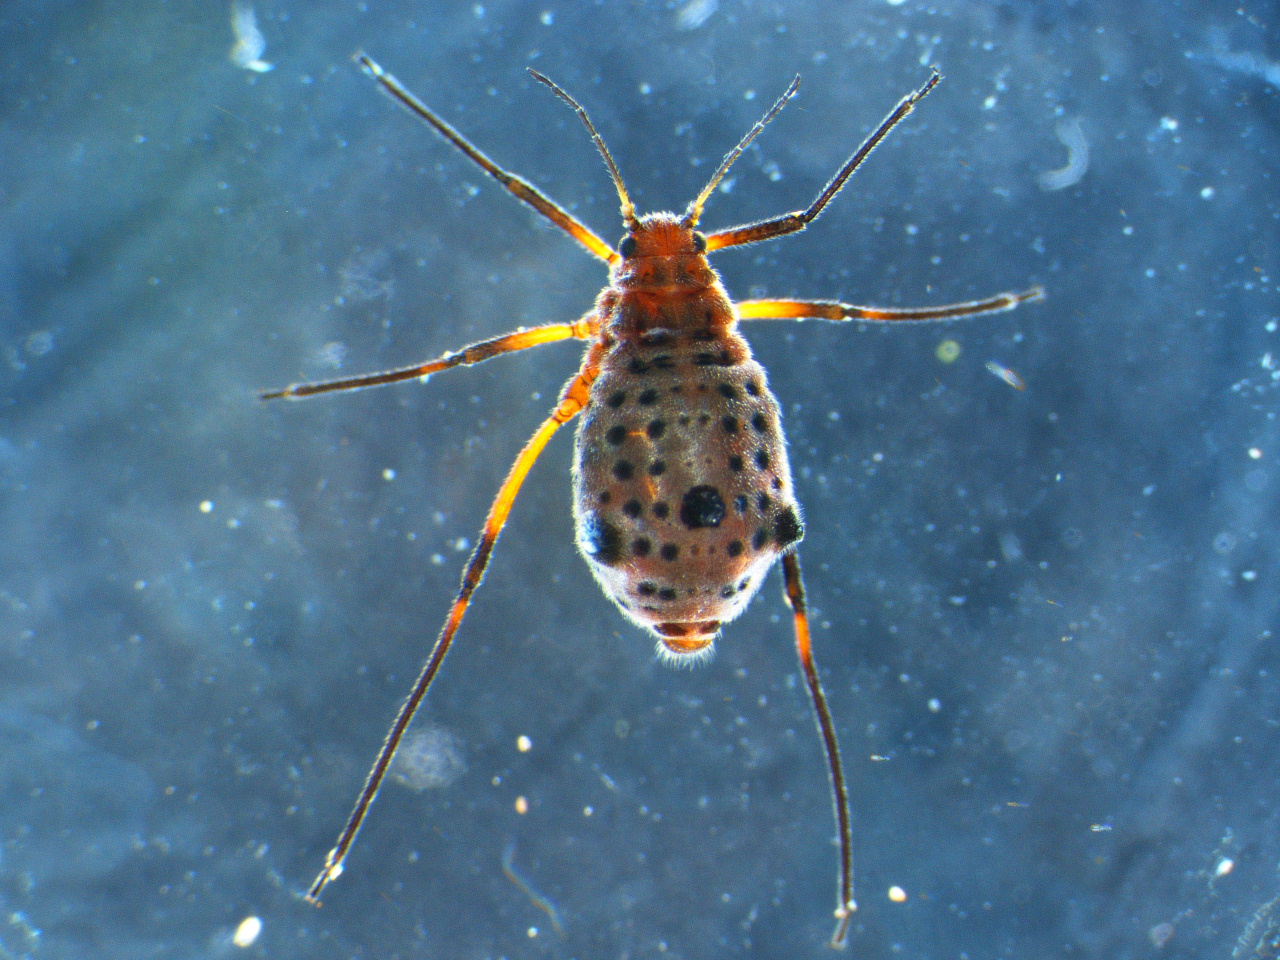 Close up photo of an adult giant willow aphid under a microscope- showing black spots and tubercles